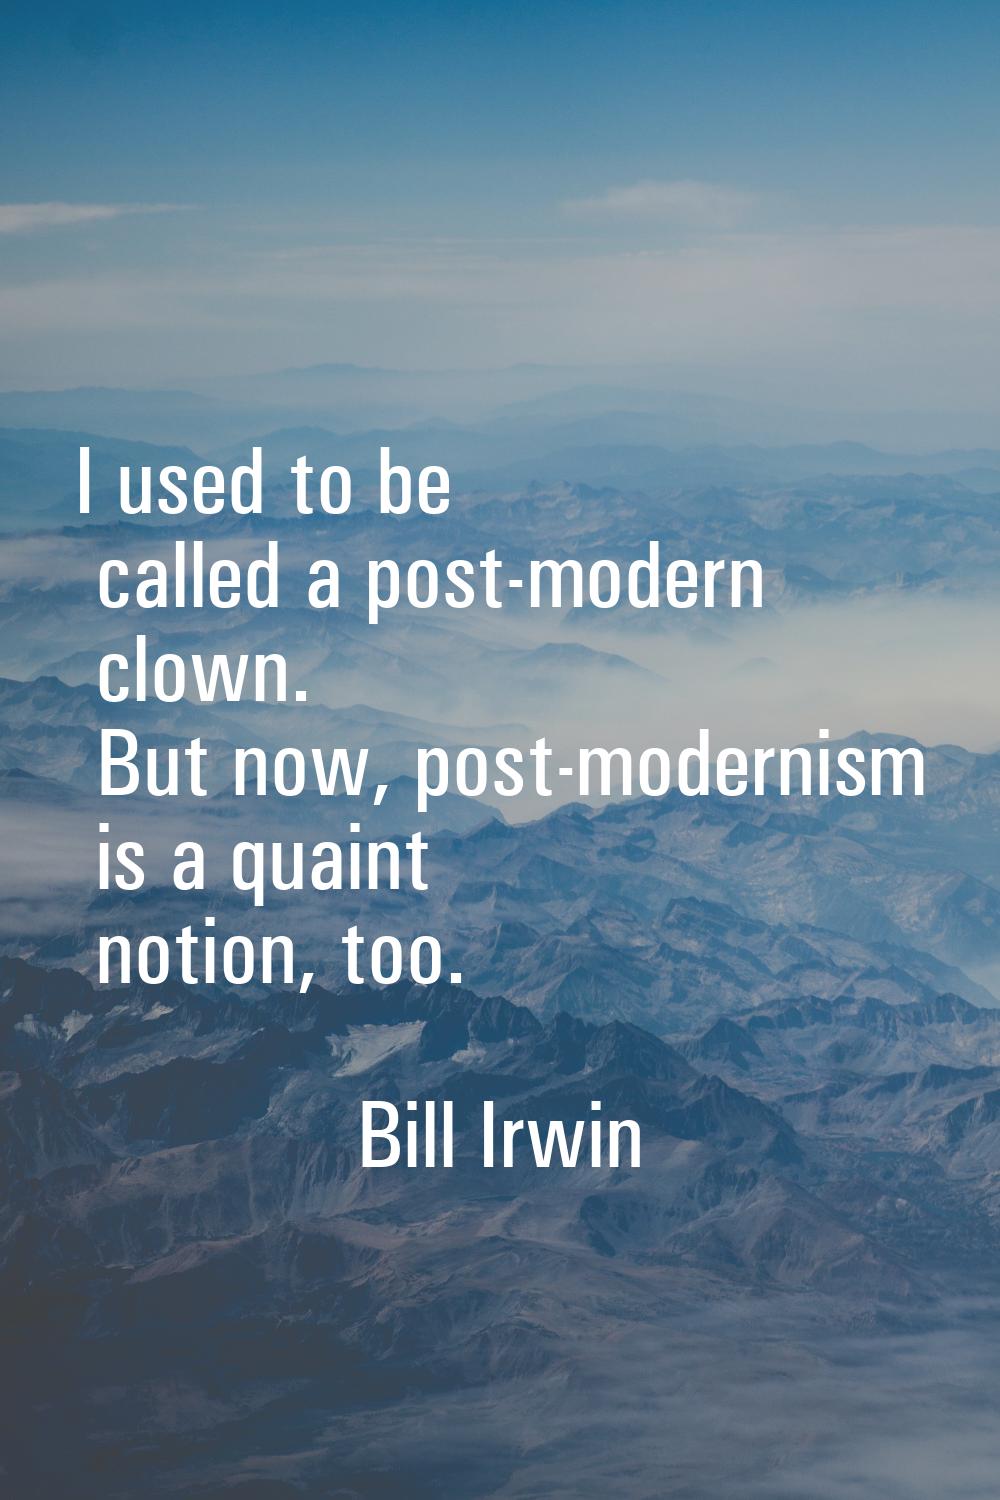 I used to be called a post-modern clown. But now, post-modernism is a quaint notion, too.